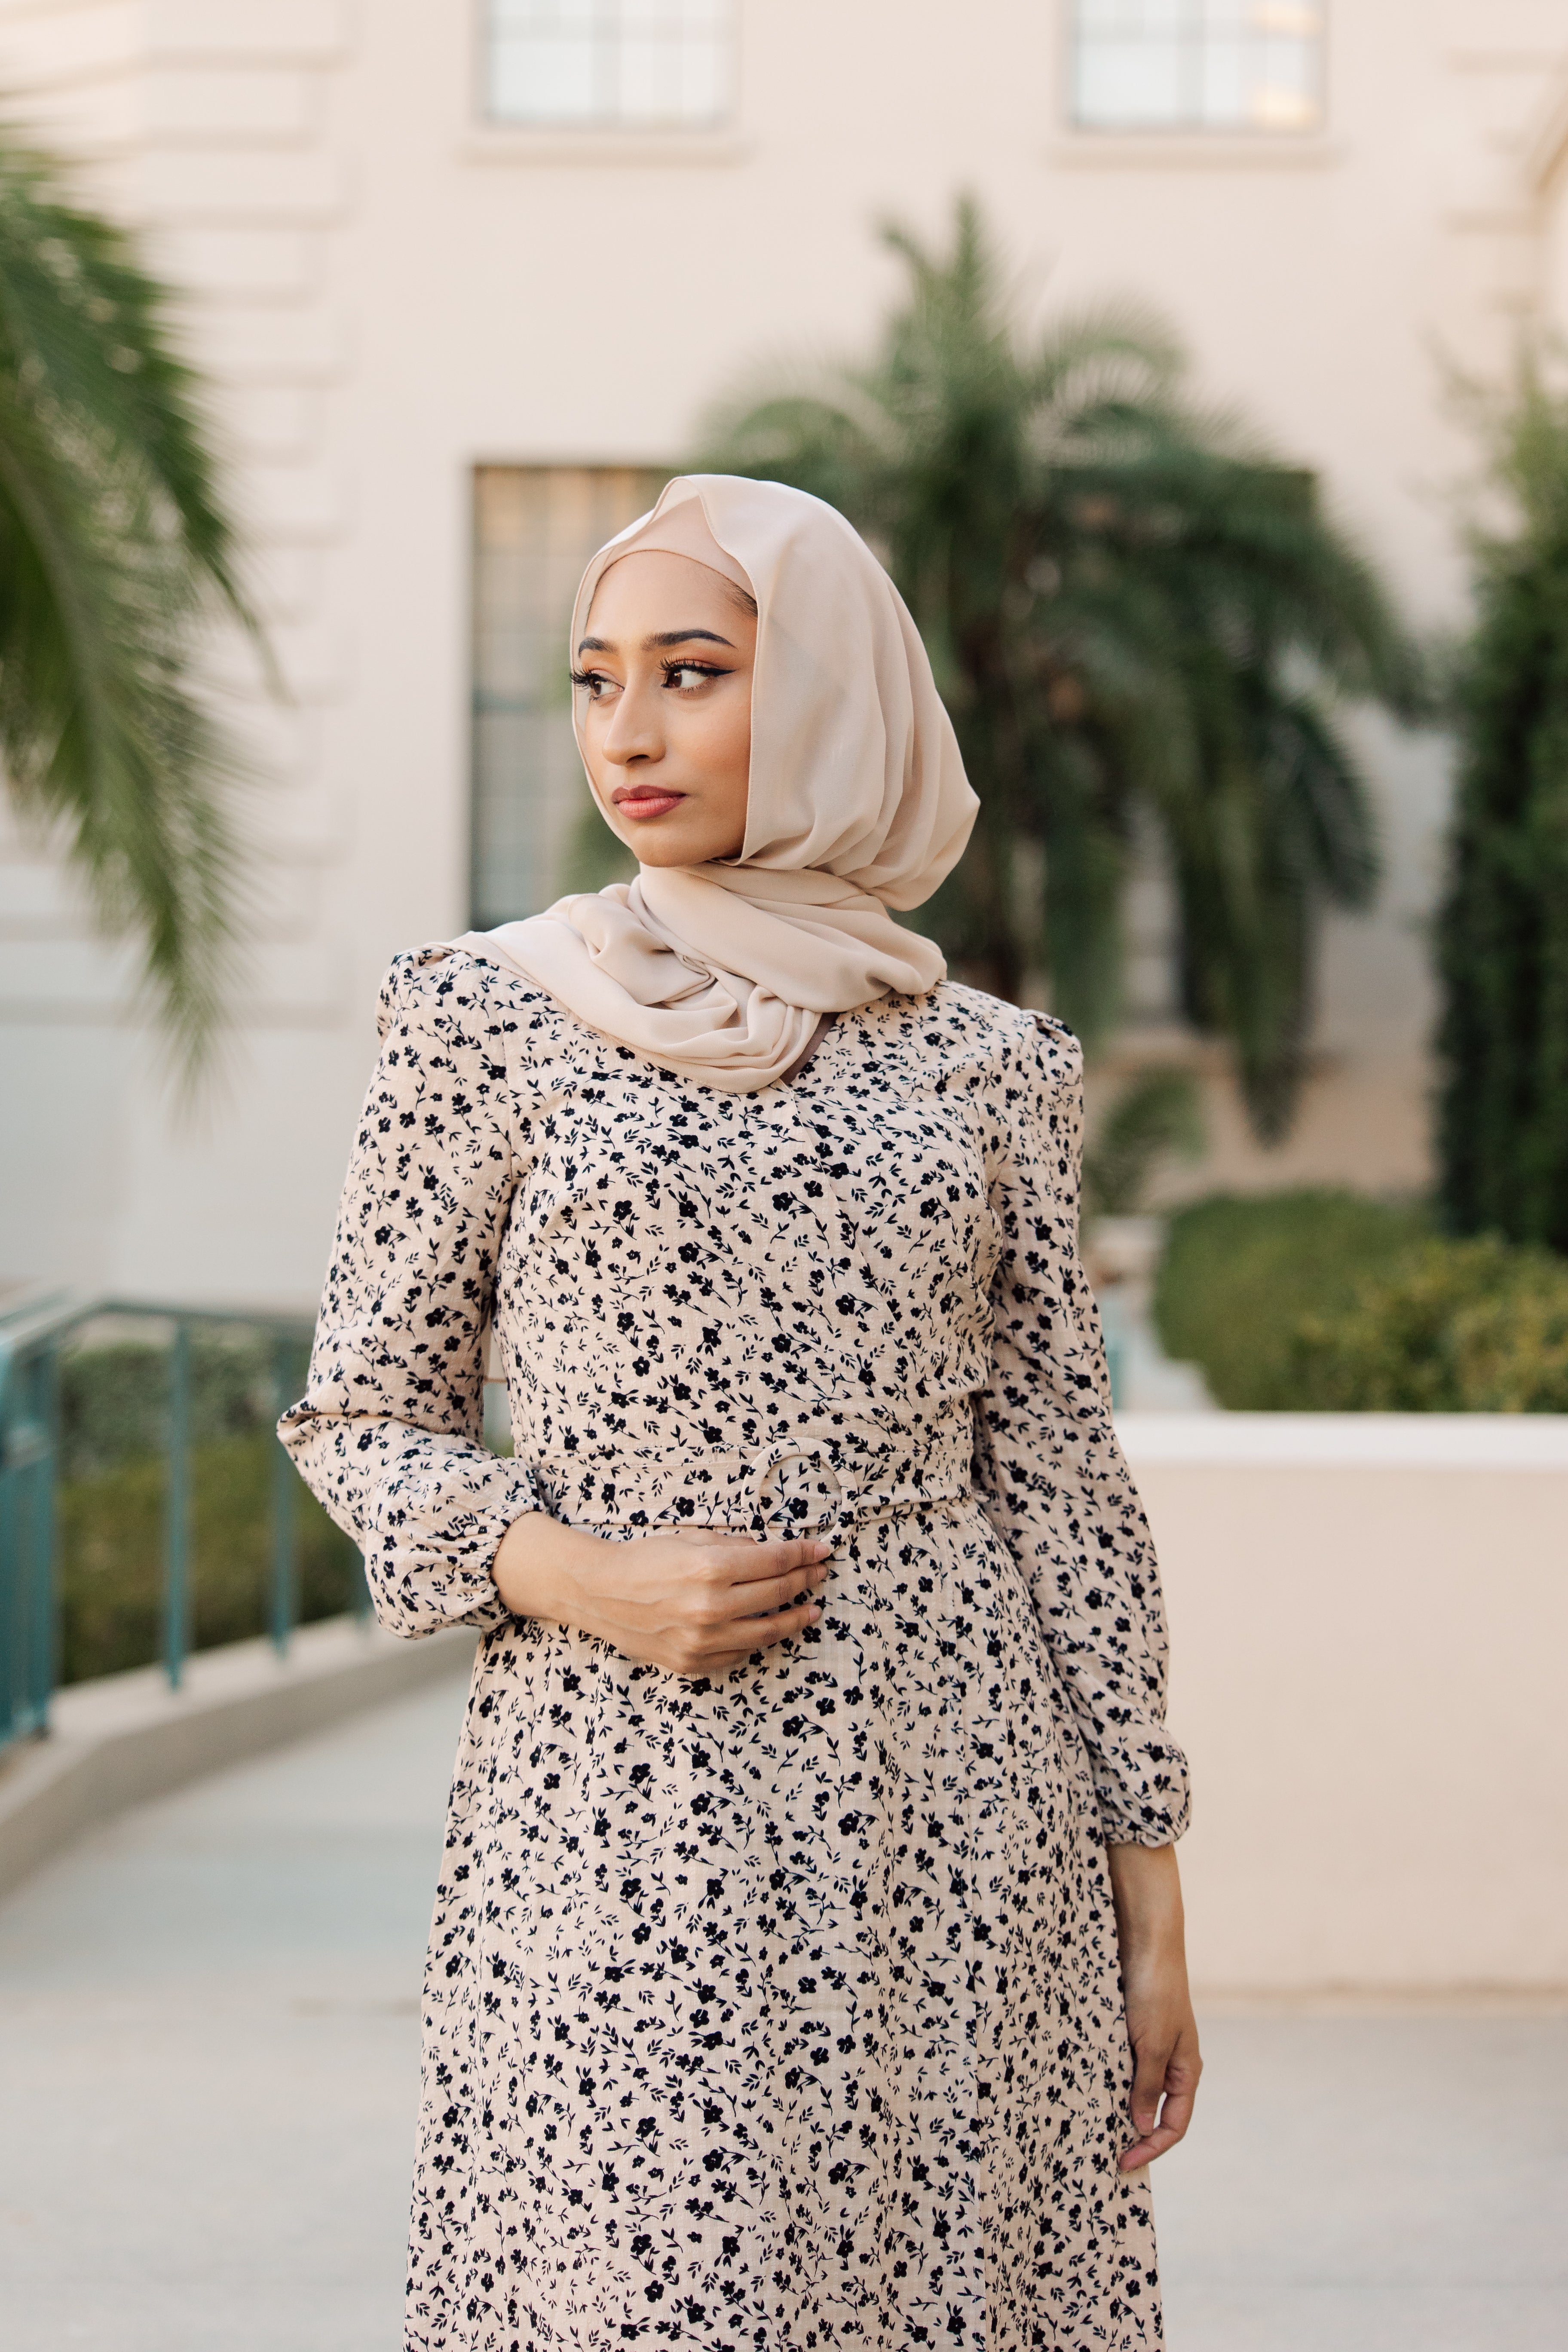 Exquisite Sequin Arabic Turkish Islamic Evening Dresses With Hijab And  Beads Half Long Sleeve Dubai Kaftan For Formal Parties And Celebrity Events  Customizable From Lilliantan, $156.31 | DHgate.Com